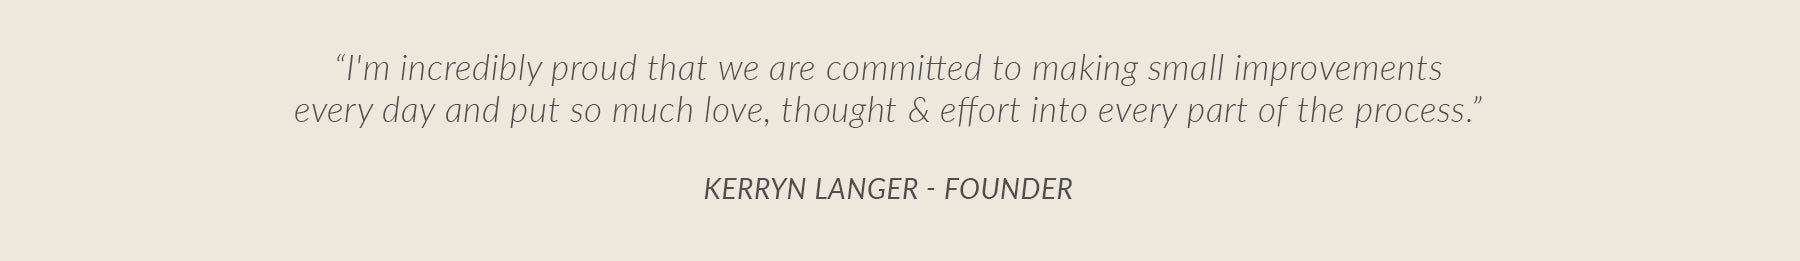 Quote from Kerryn Langer, founder of Arms Of Eve, featured on white background